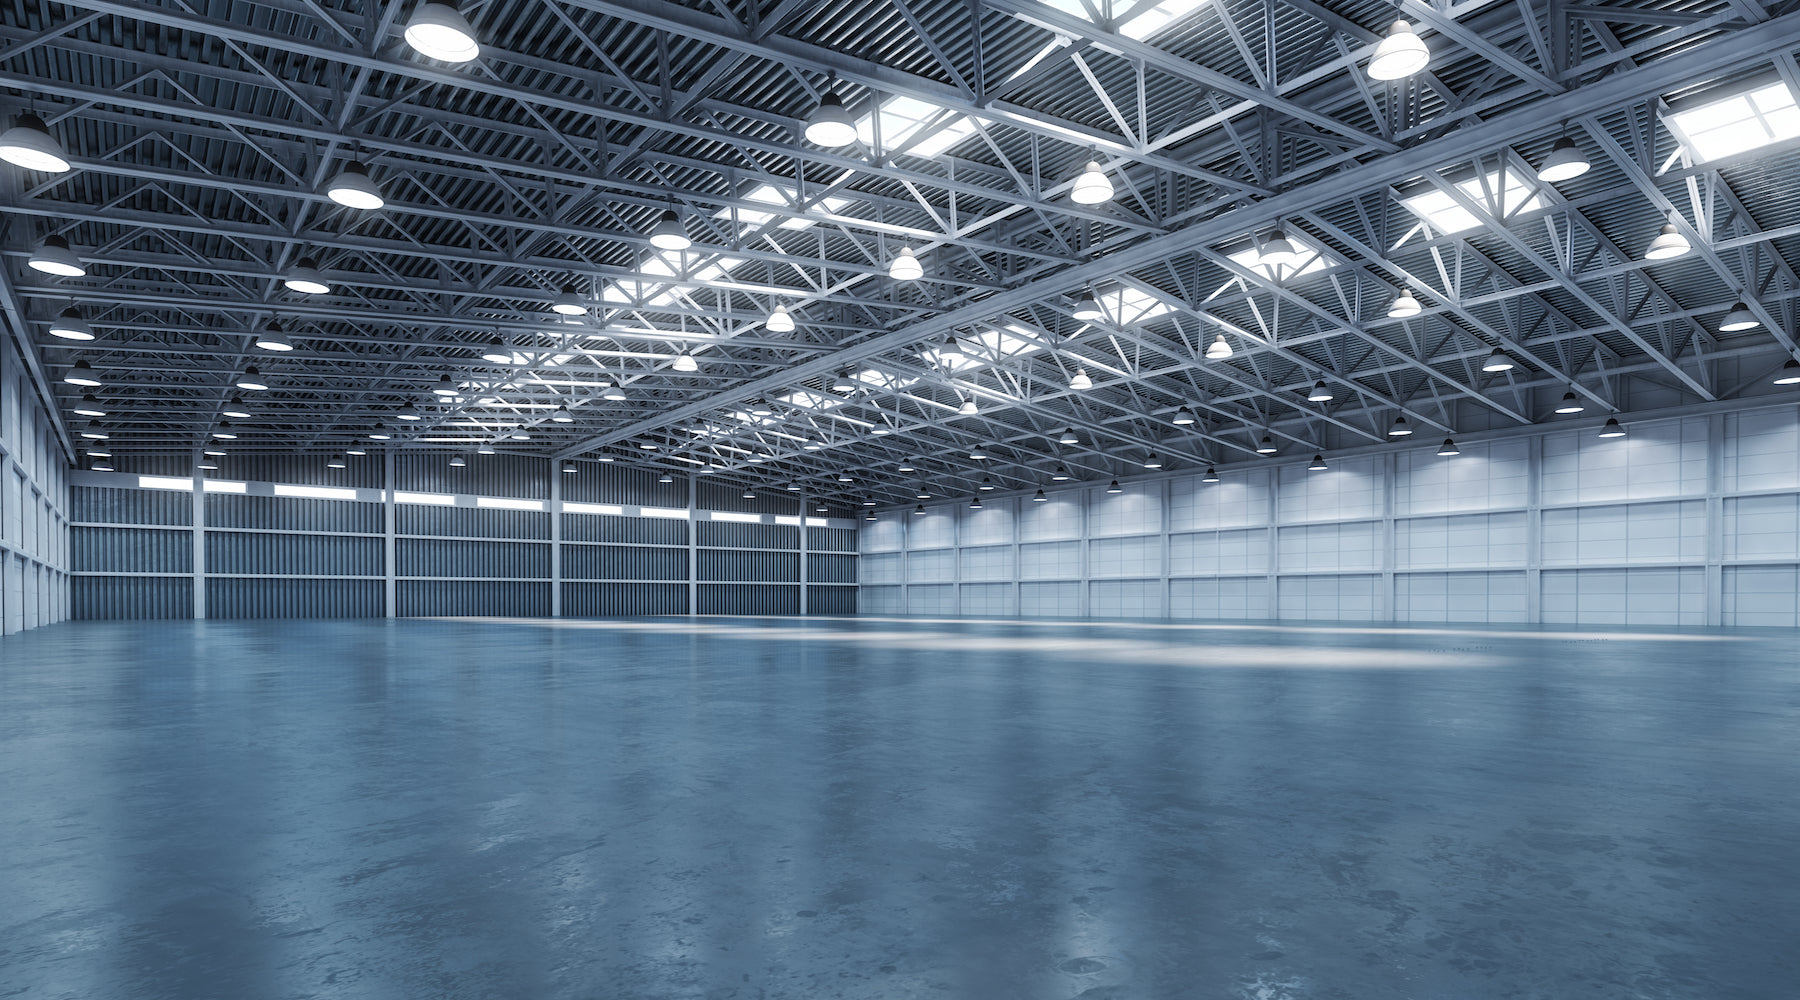 High bay lights installed in a warehouse